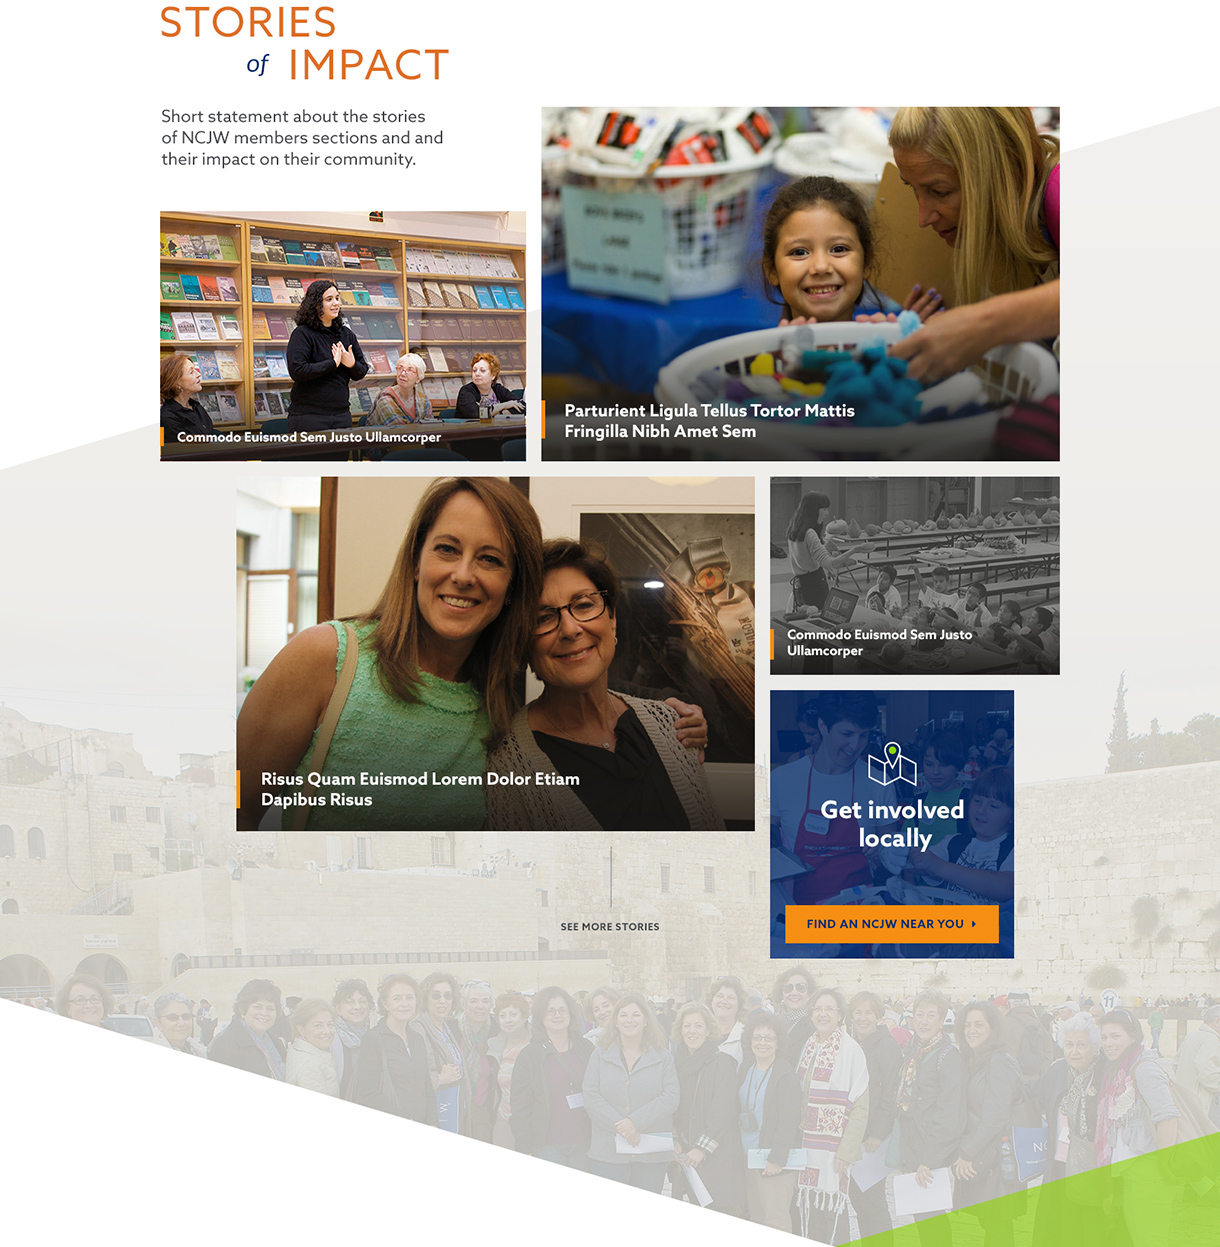 Featured impact stories area of the homepage of the website